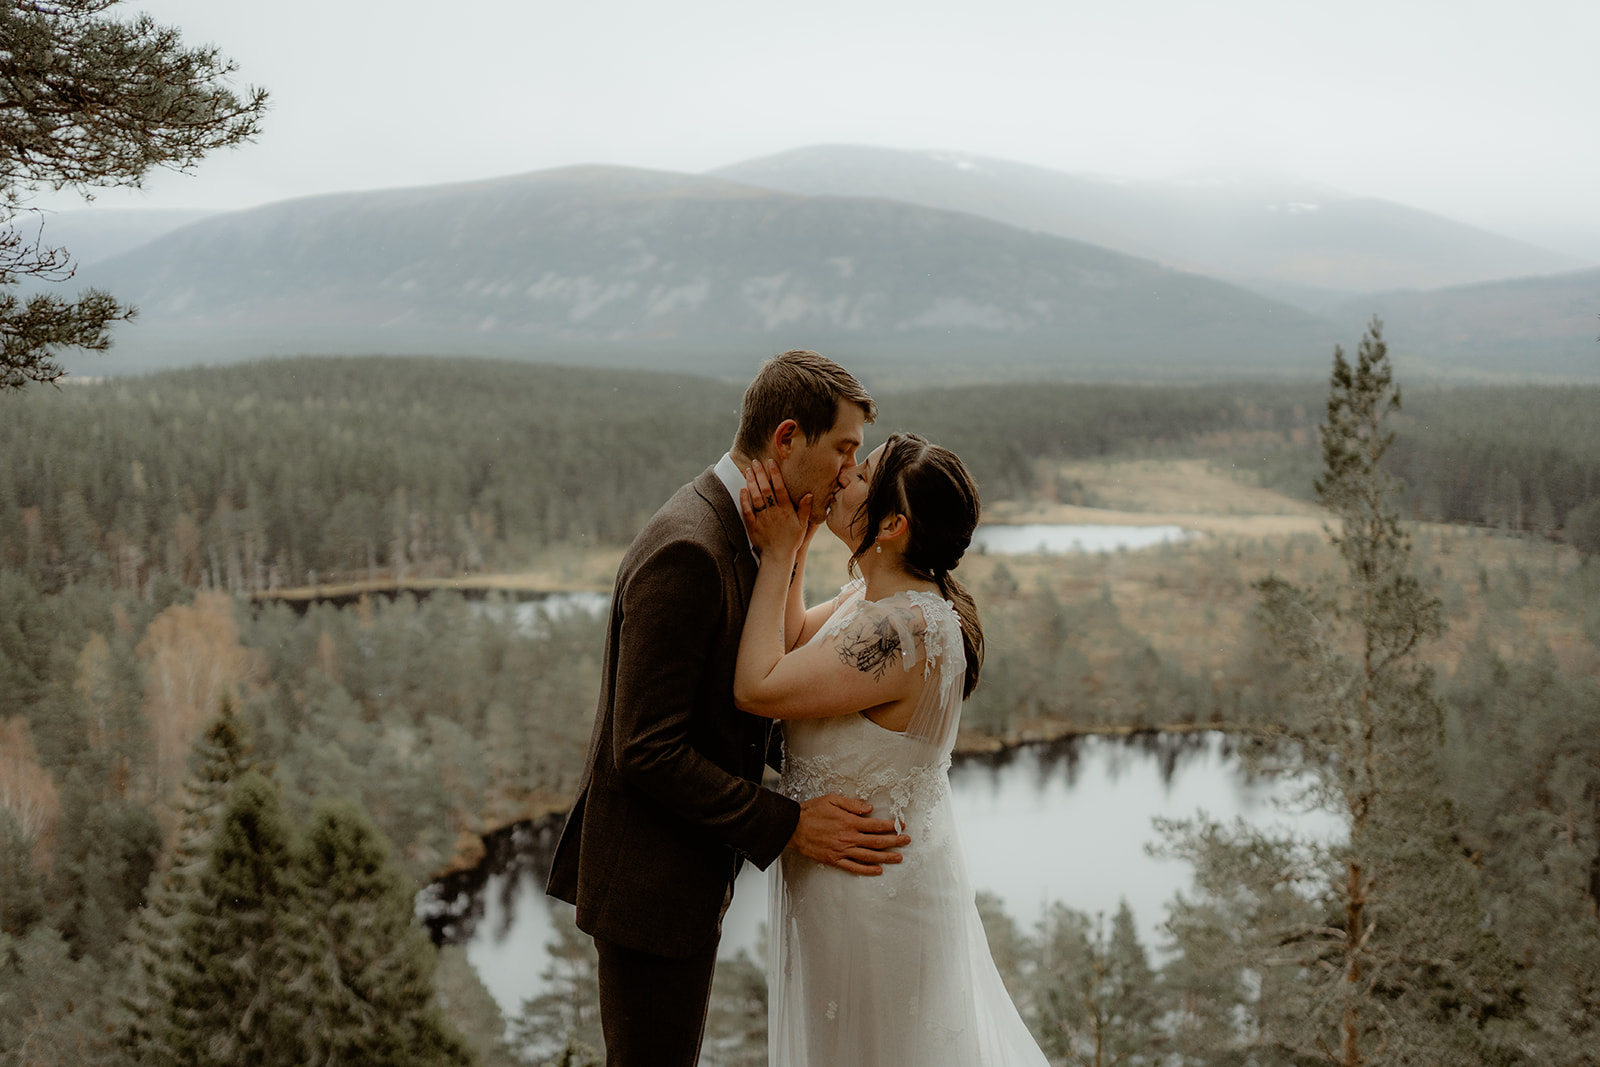 Bride and Groom share a kiss outdoors with view of mountains and lochs